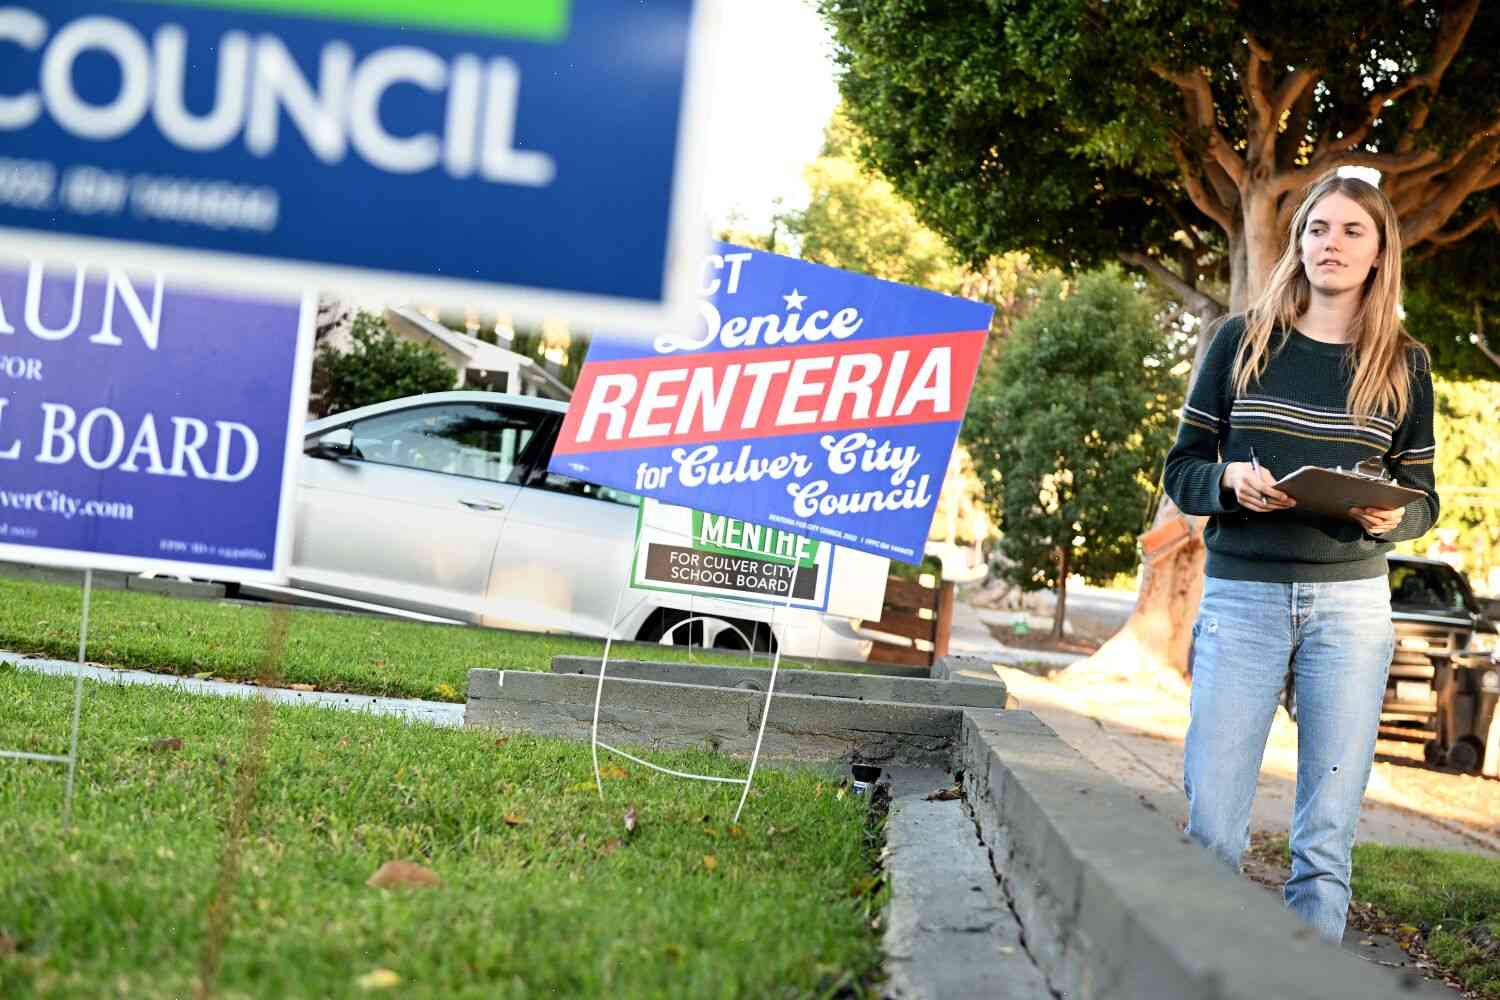 Culver City to vote to lower voting age limits